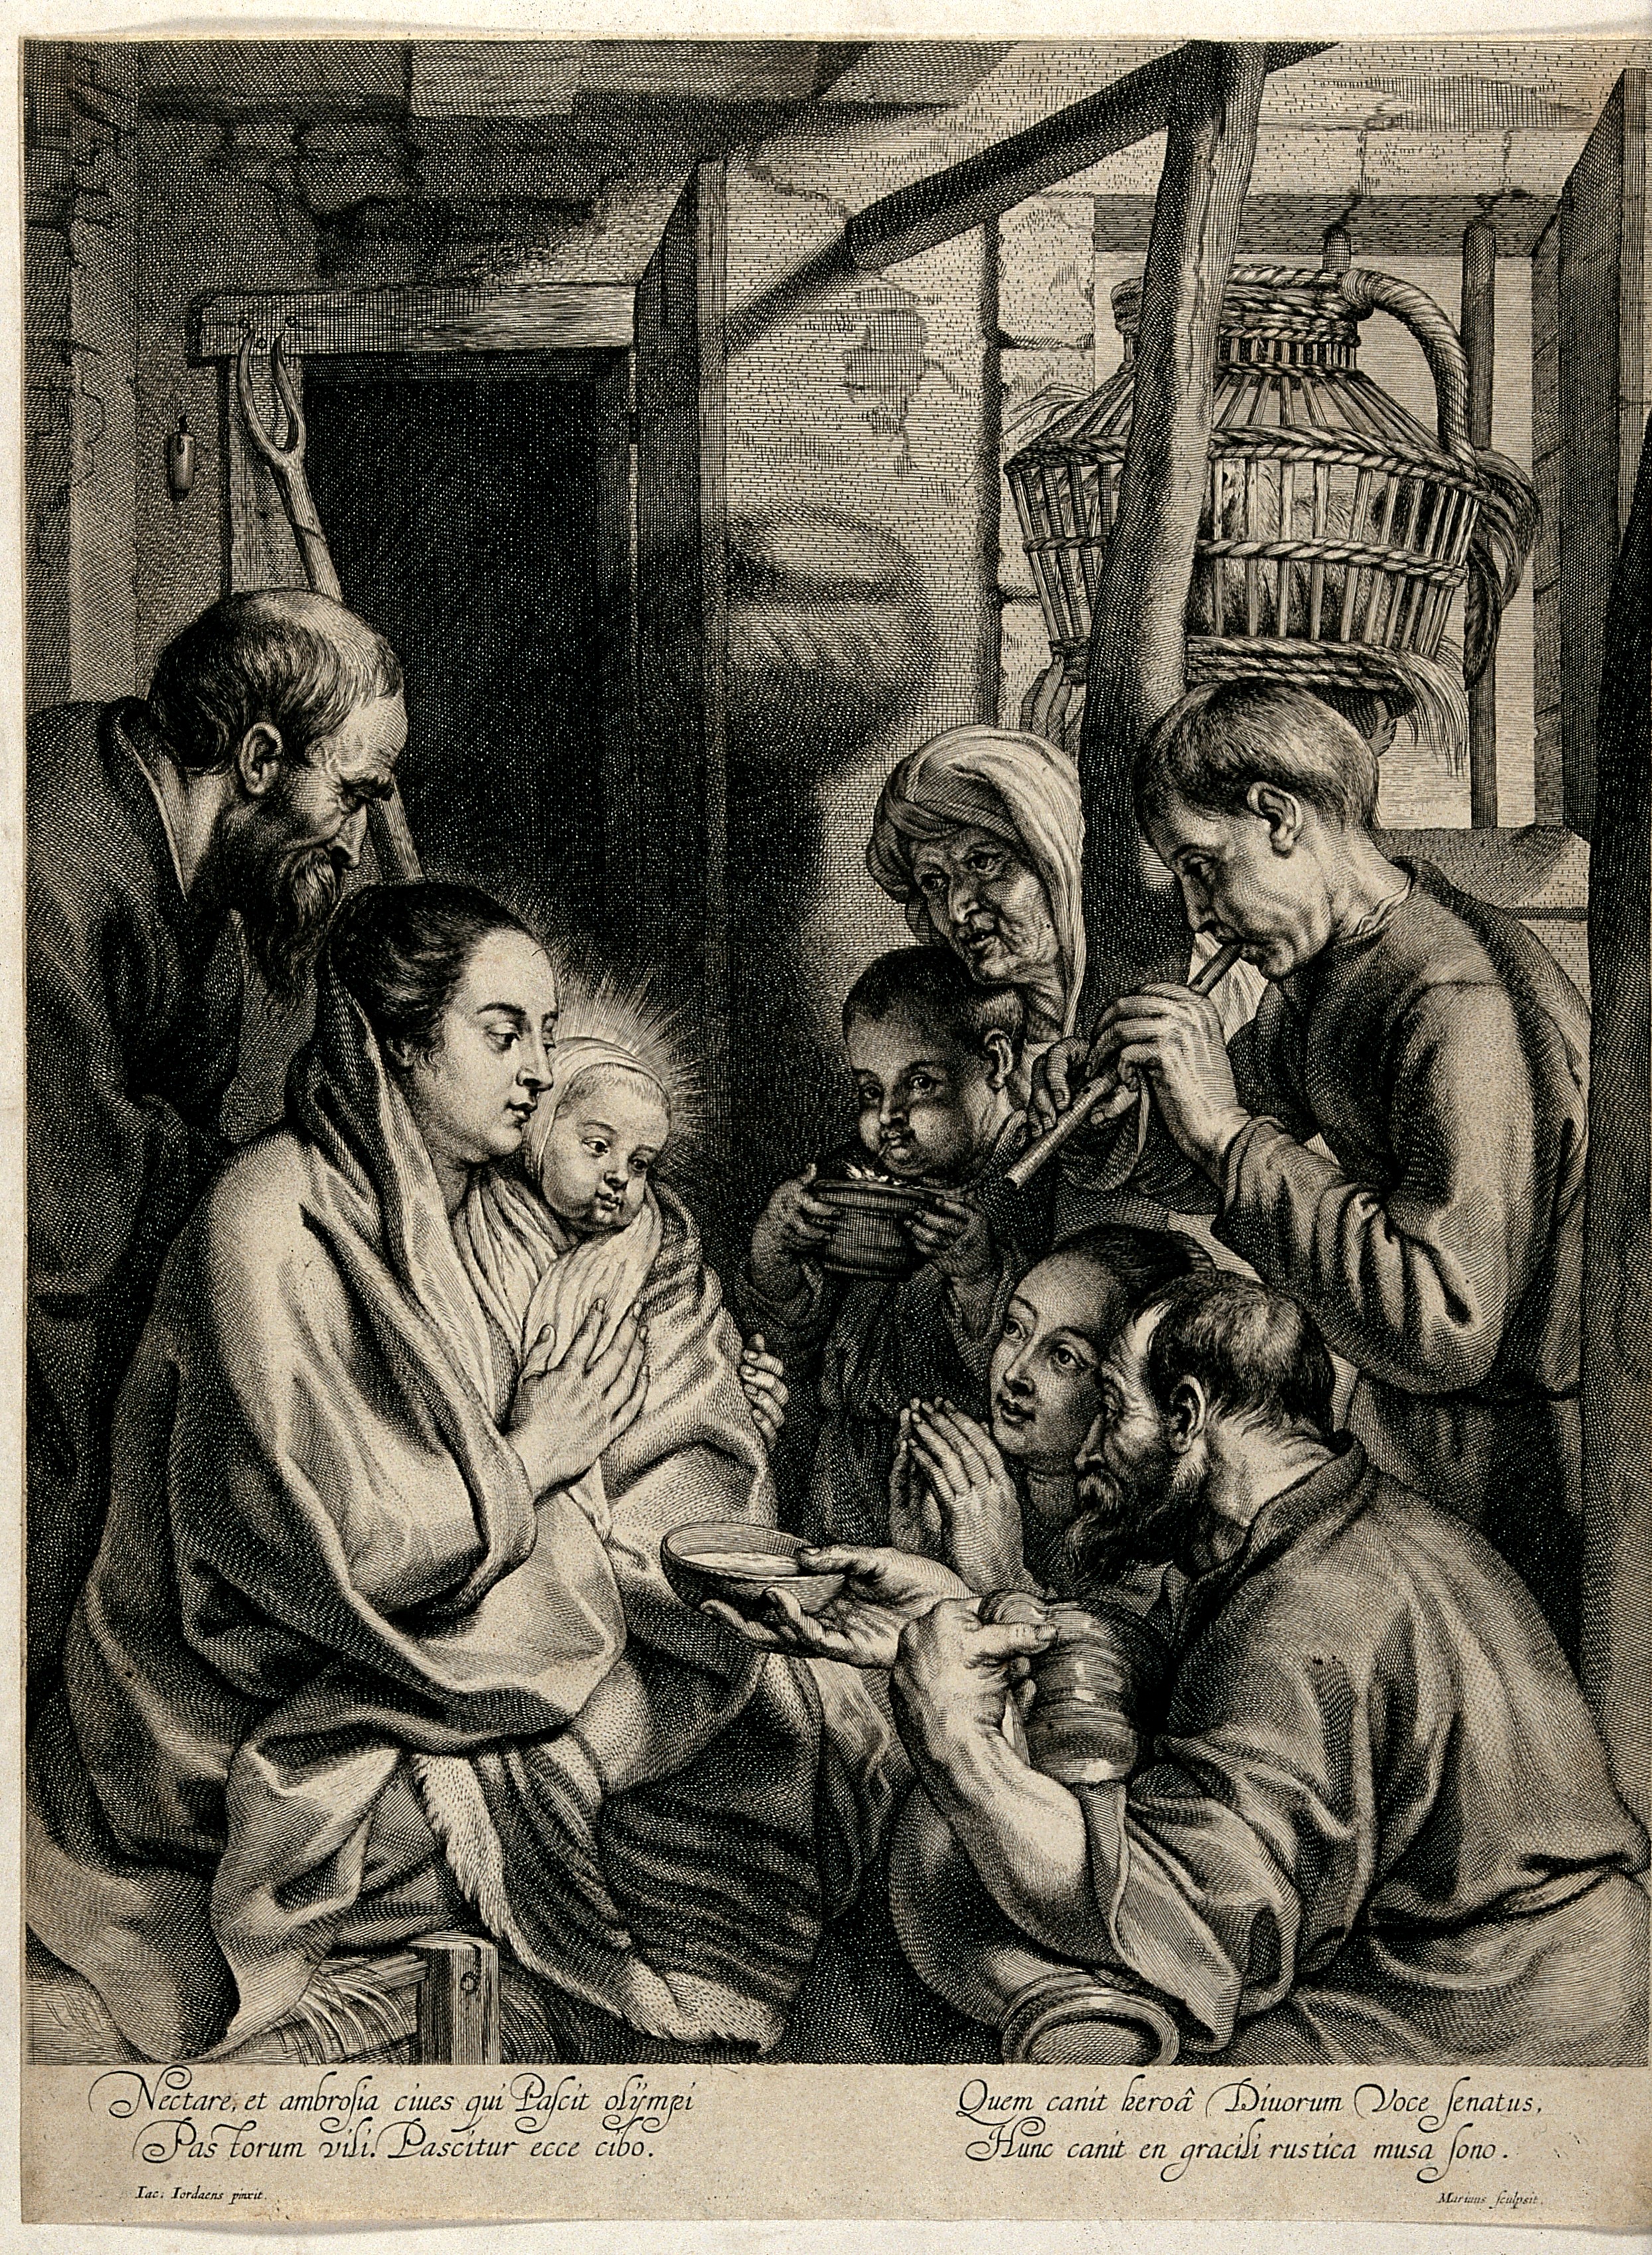 The adoration of the shepherds at the birth of Christ. Engra Wellcome V0048951